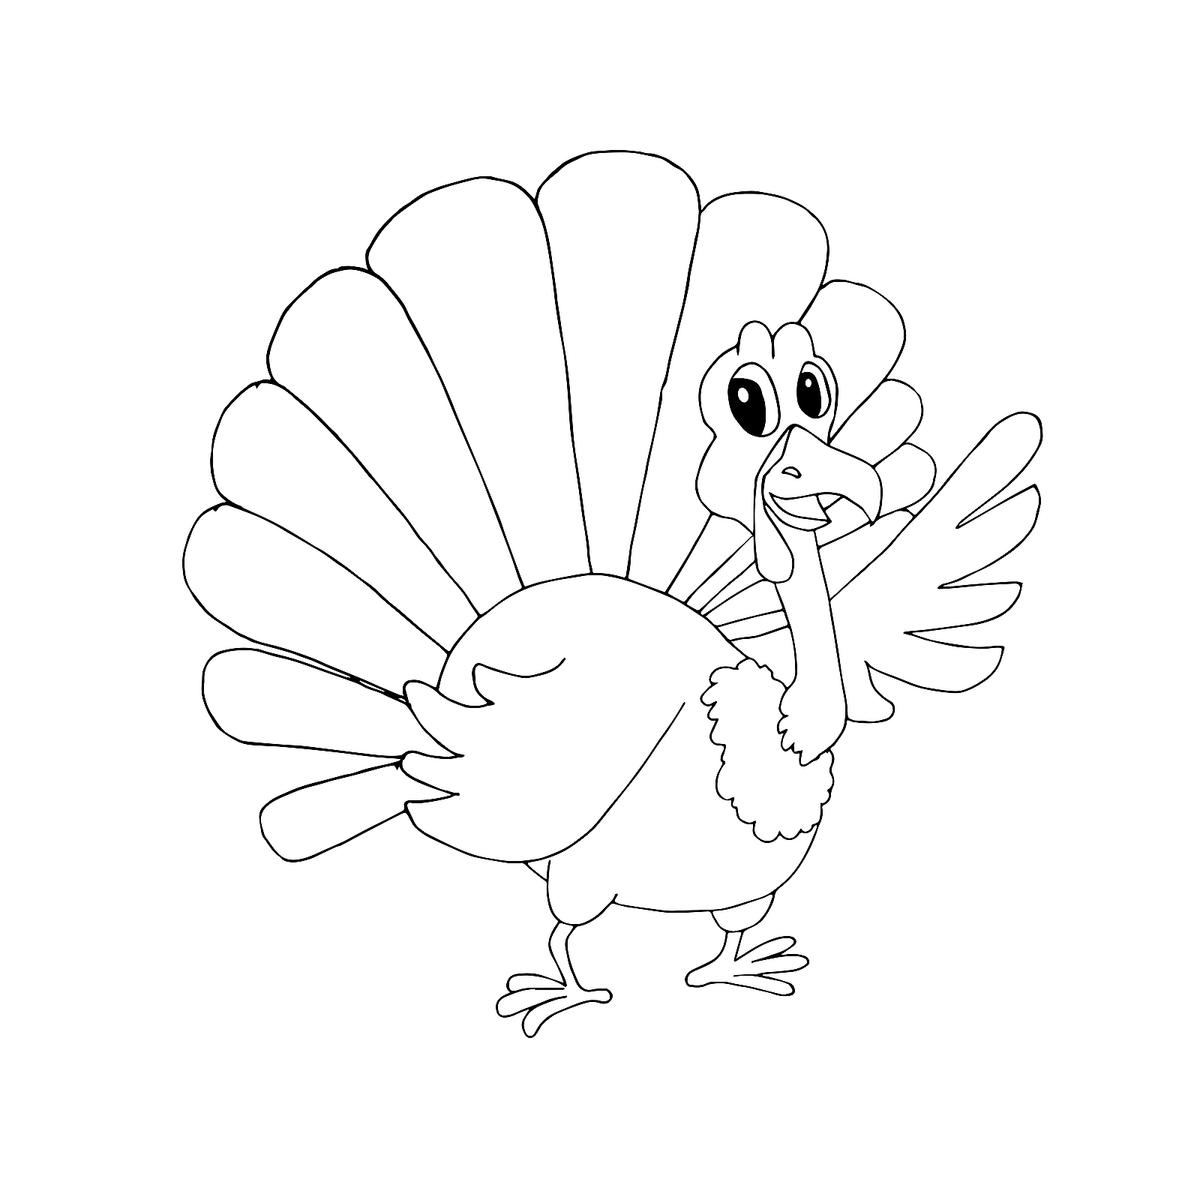 Printable Thanksgiving Coloring Page for kids.